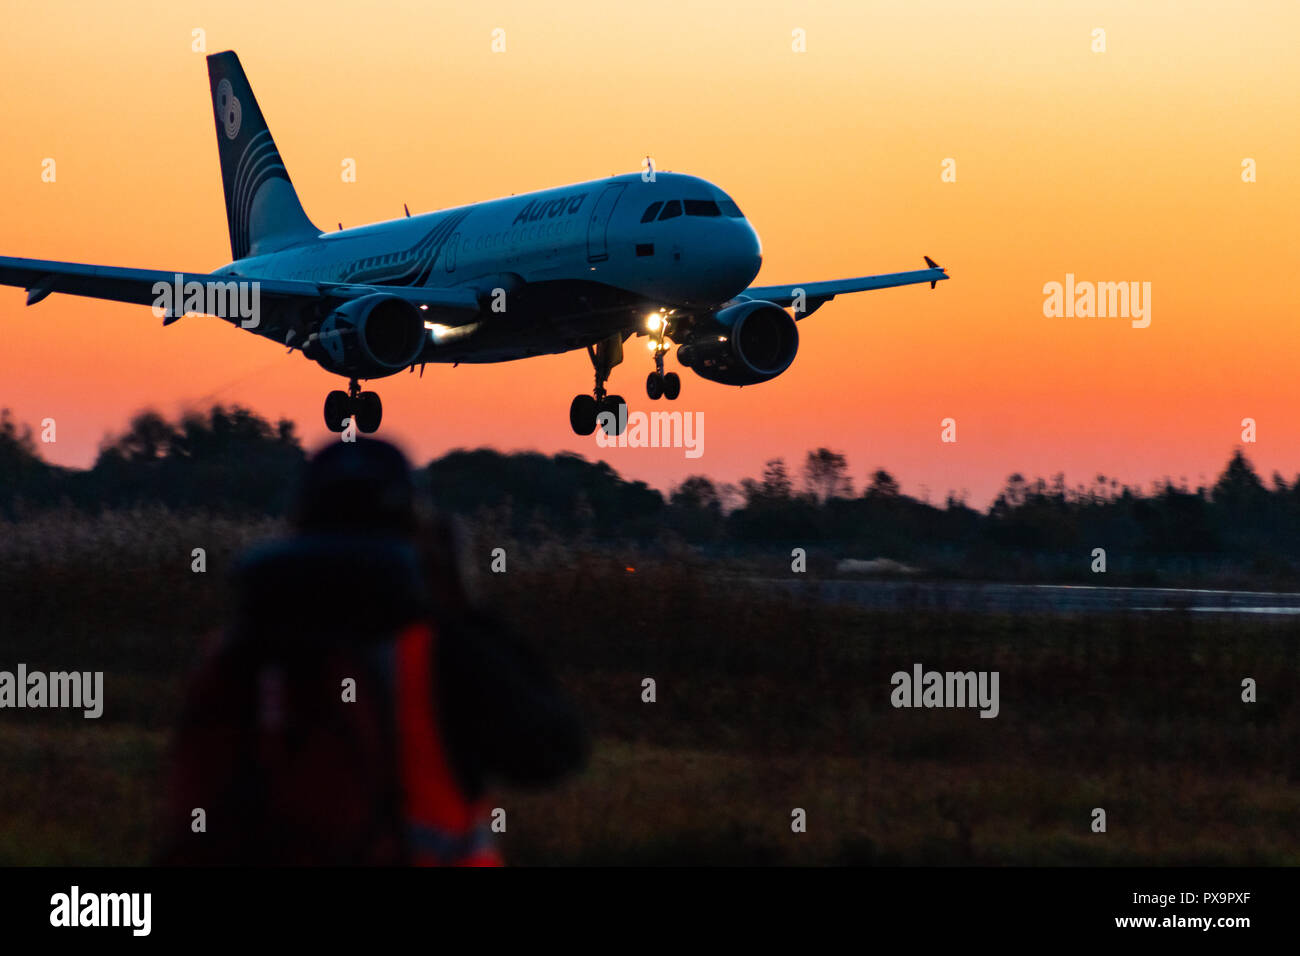 KHABAROVSK, RUSSIA - SEP 29, 2018: Aircraft Airbus A319-111 VP-BBN Aurora airline lands at the airport of Khabarovsk. Photographs landing photographer. Stock Photo